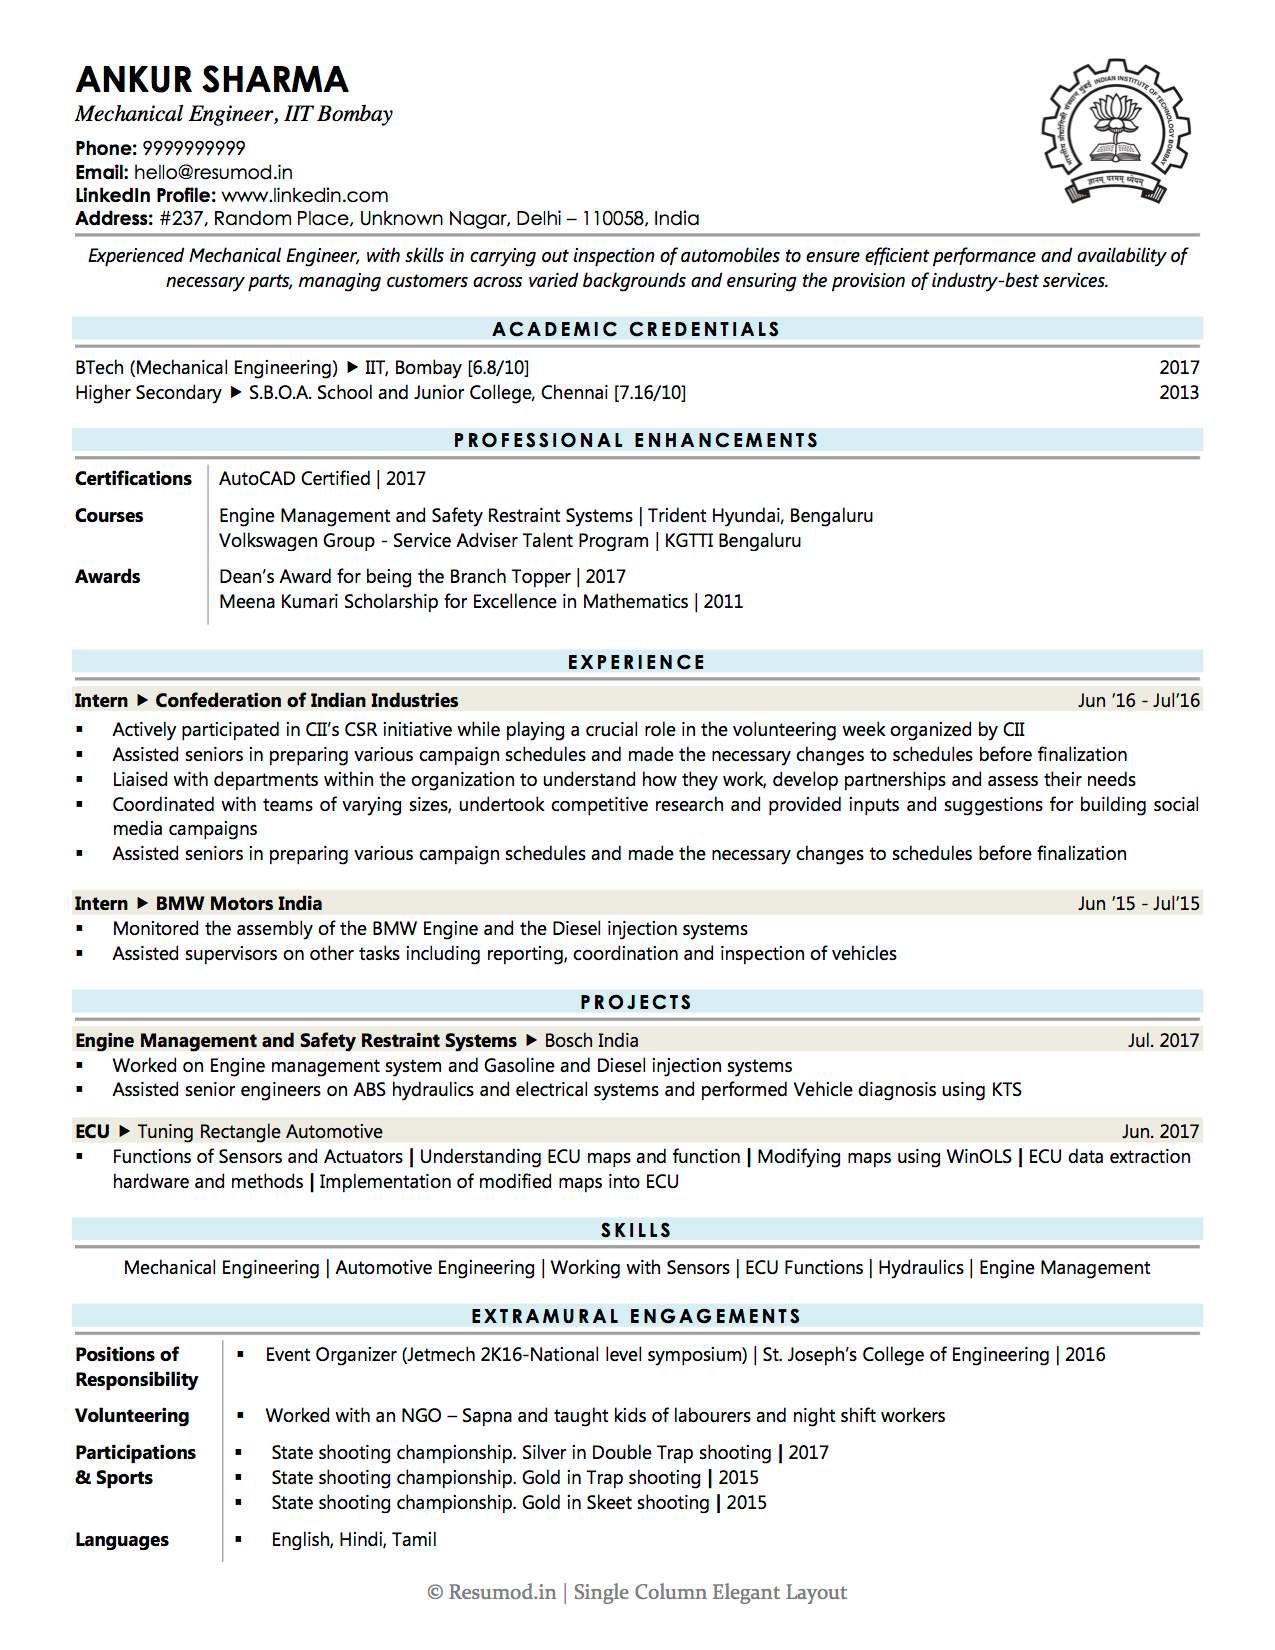 5-things-to-consider-when-formatting-your-resume